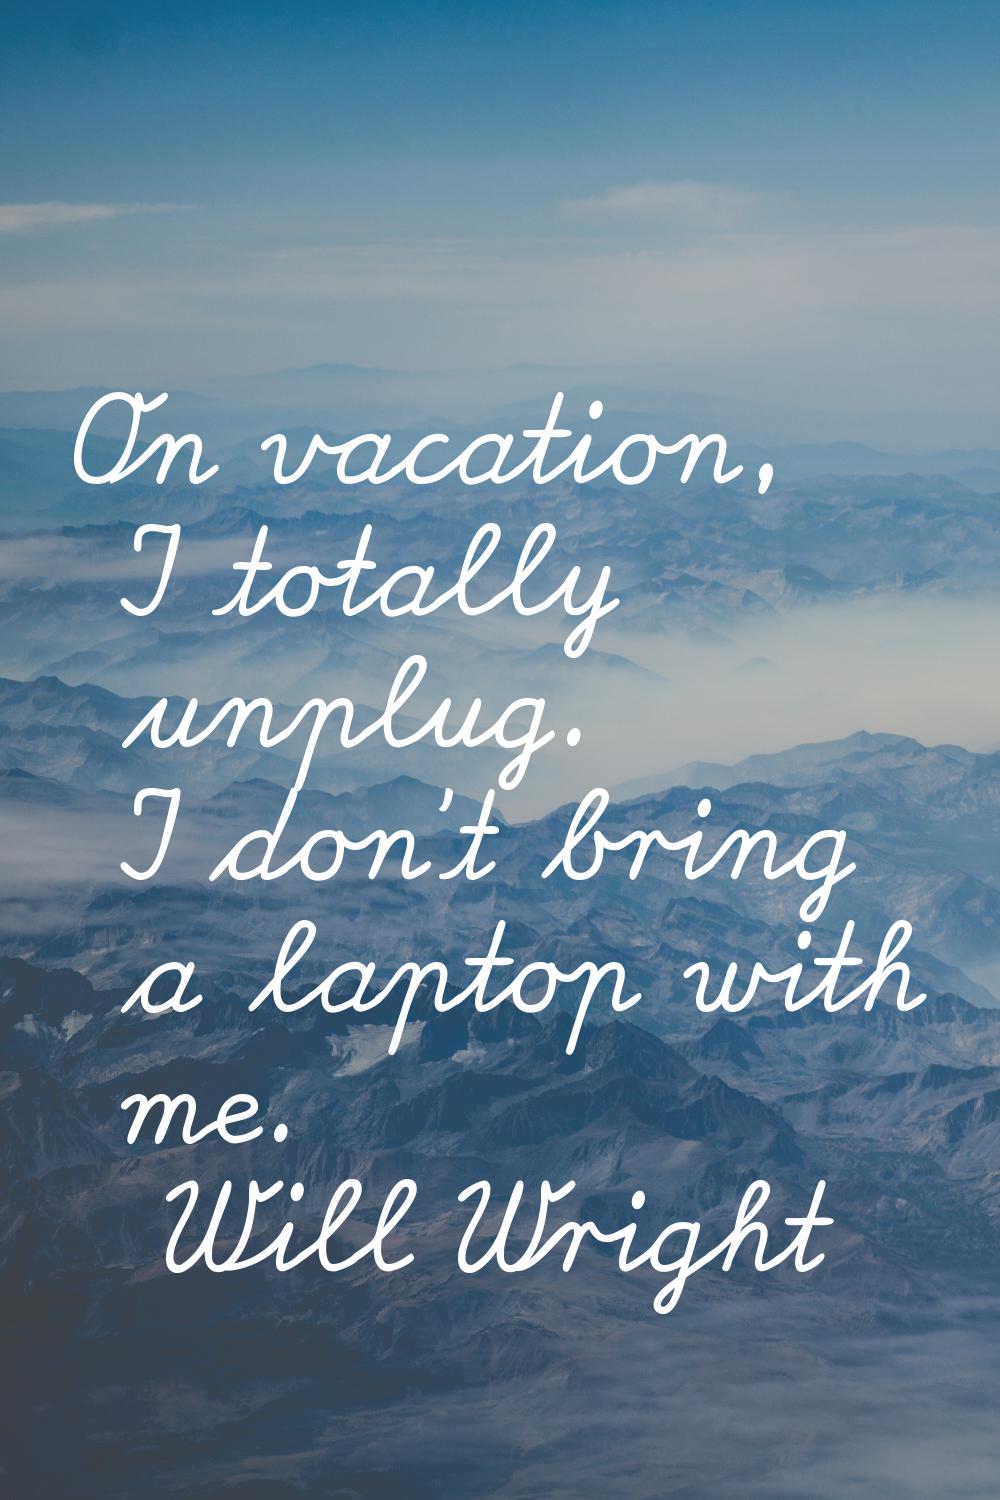 On vacation, I totally unplug. I don't bring a laptop with me.